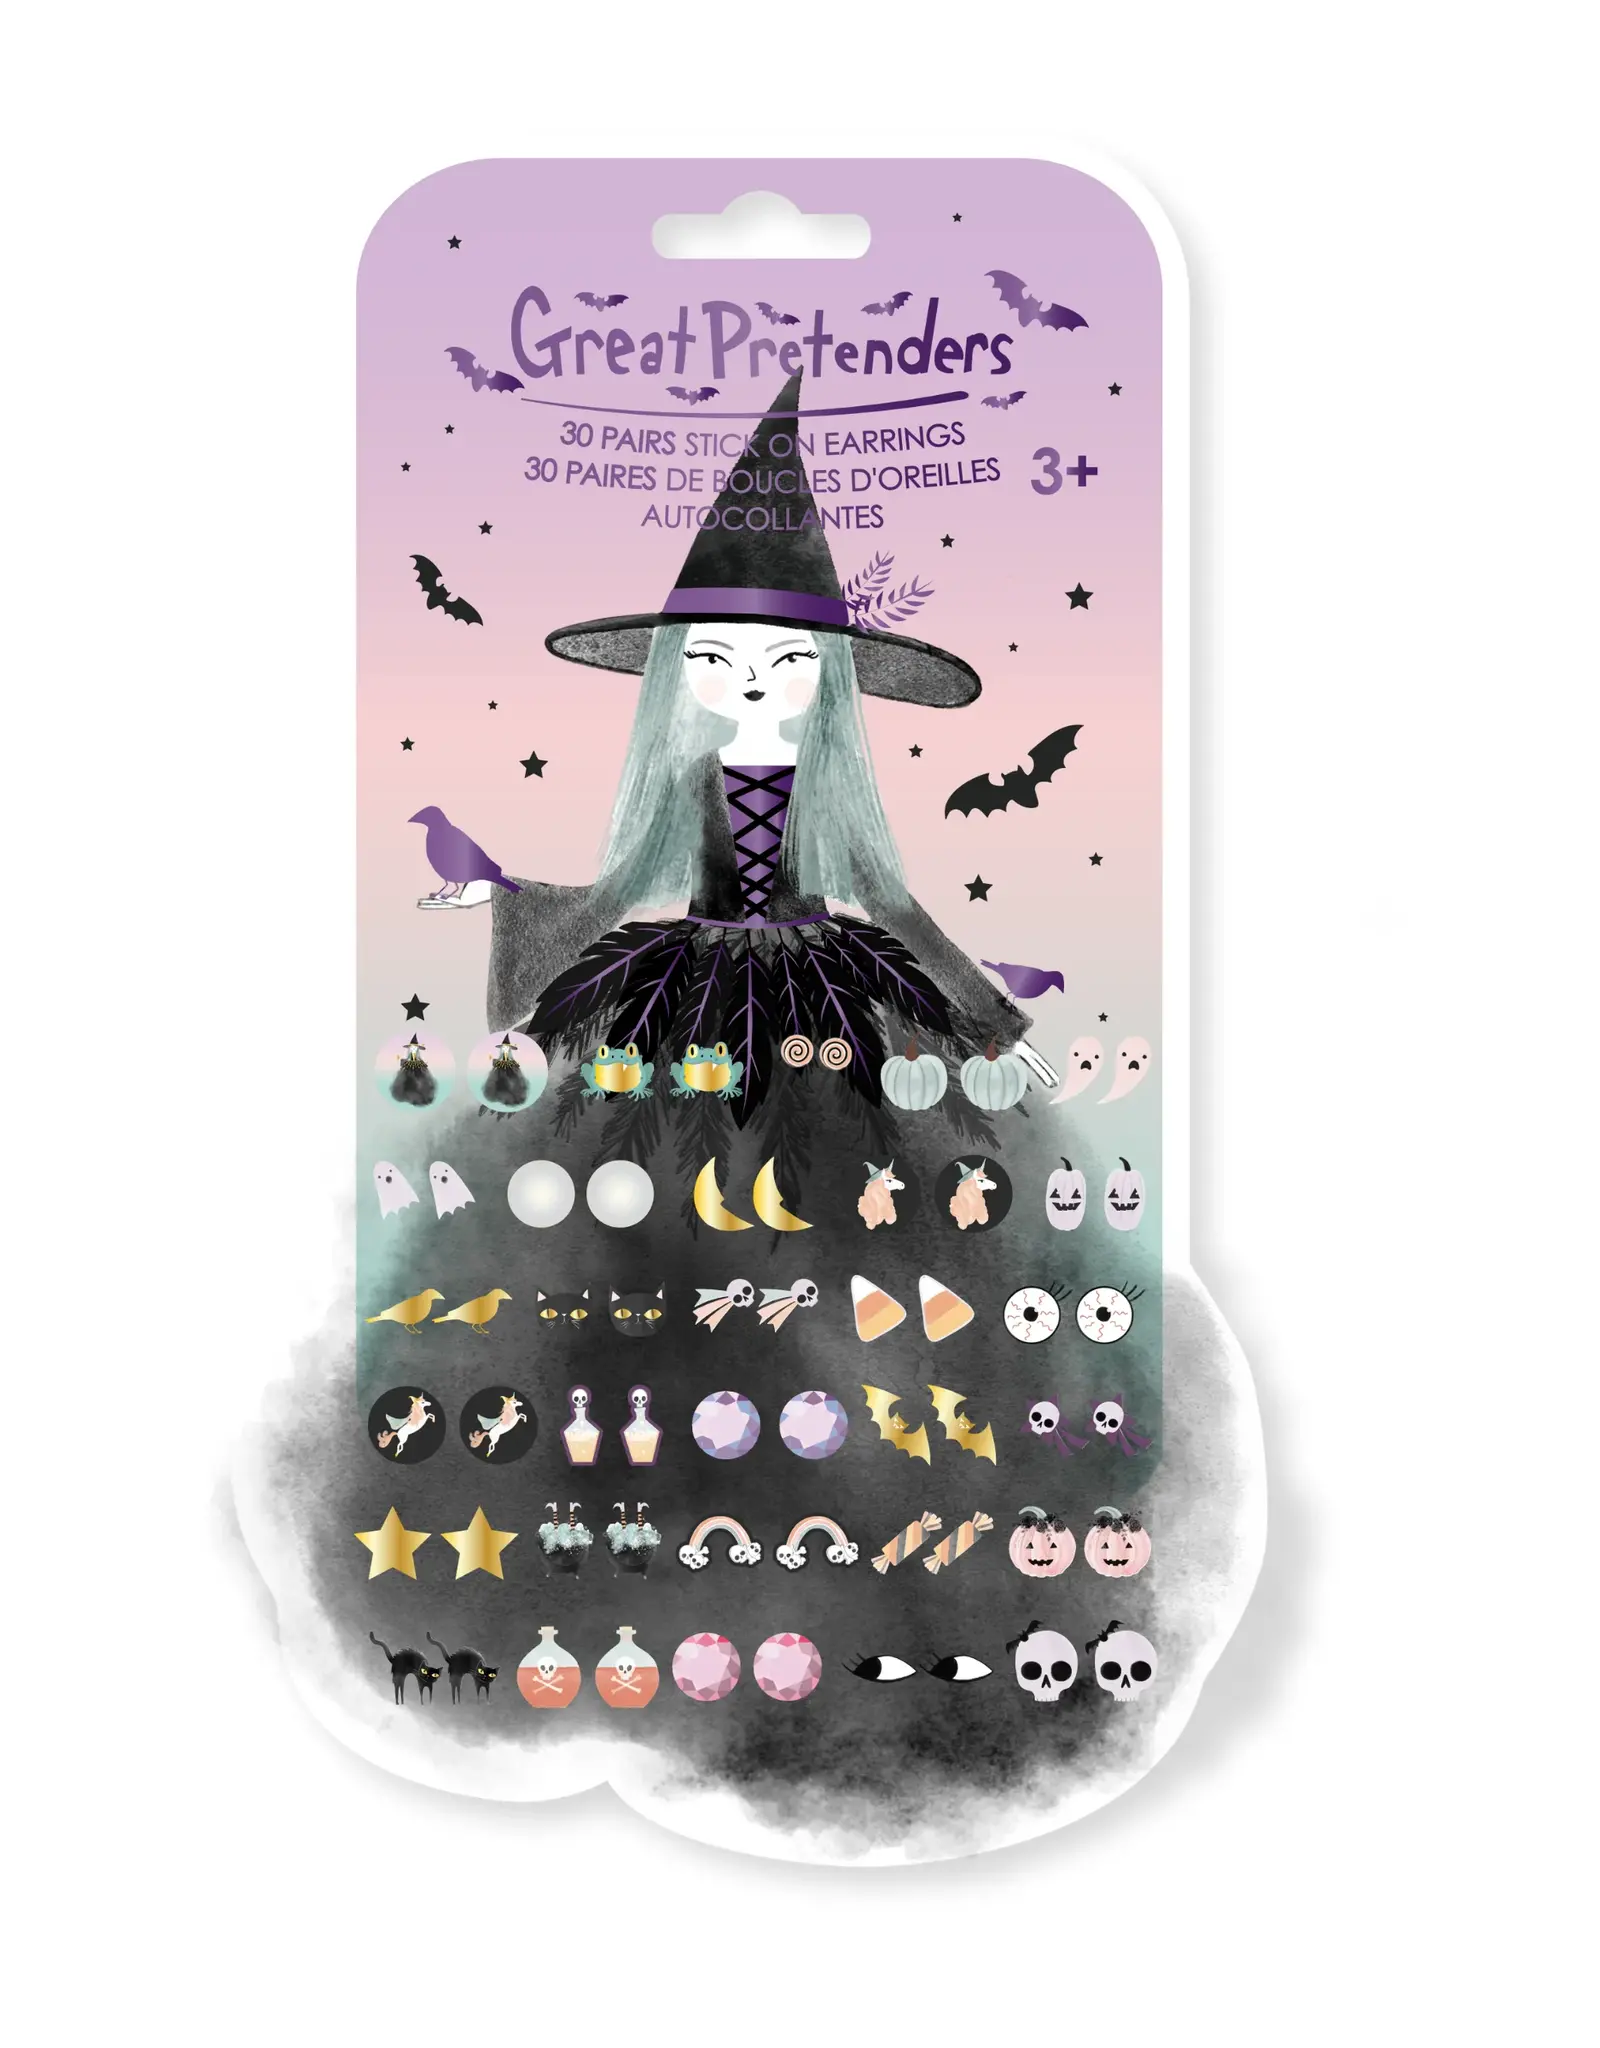 Great Pretenders Natasha The Raven Witch Sticker Earrings 30 Pairs